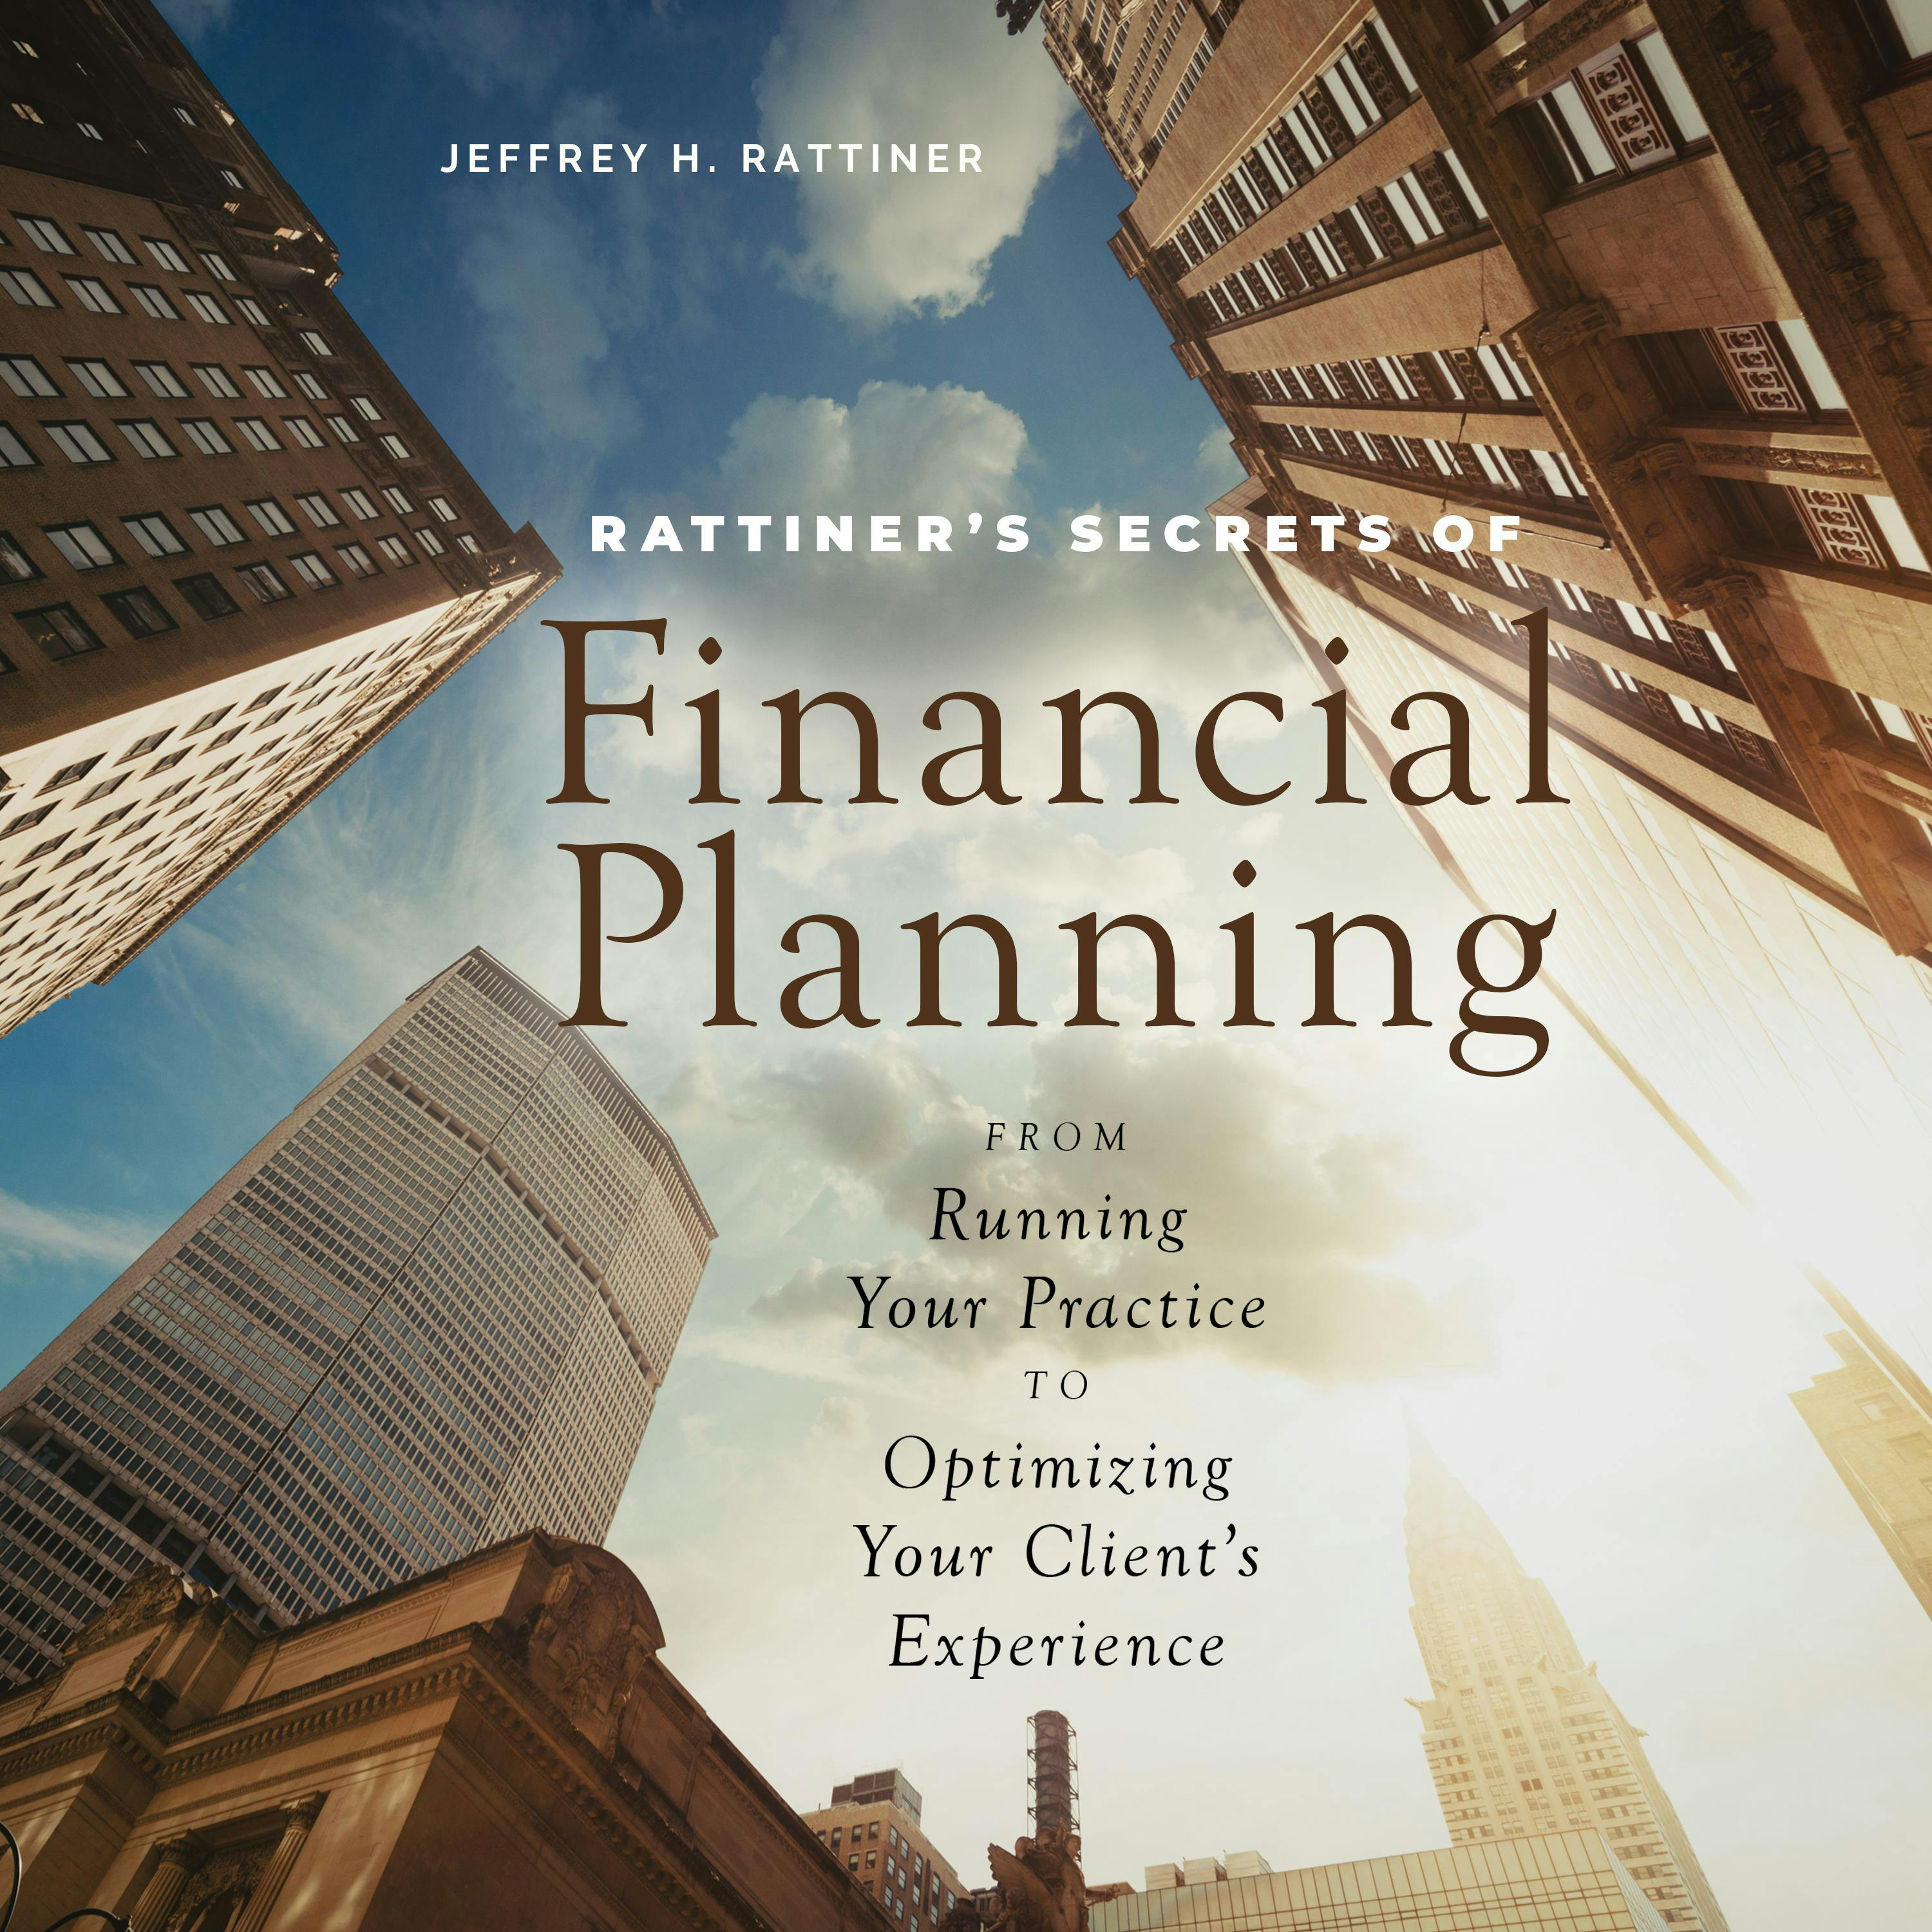 Rattiner’s Secrets of Financial Planning: From Running Your Practice to Optimizing Your Client's Experience - Jeffrey H. Rattiner